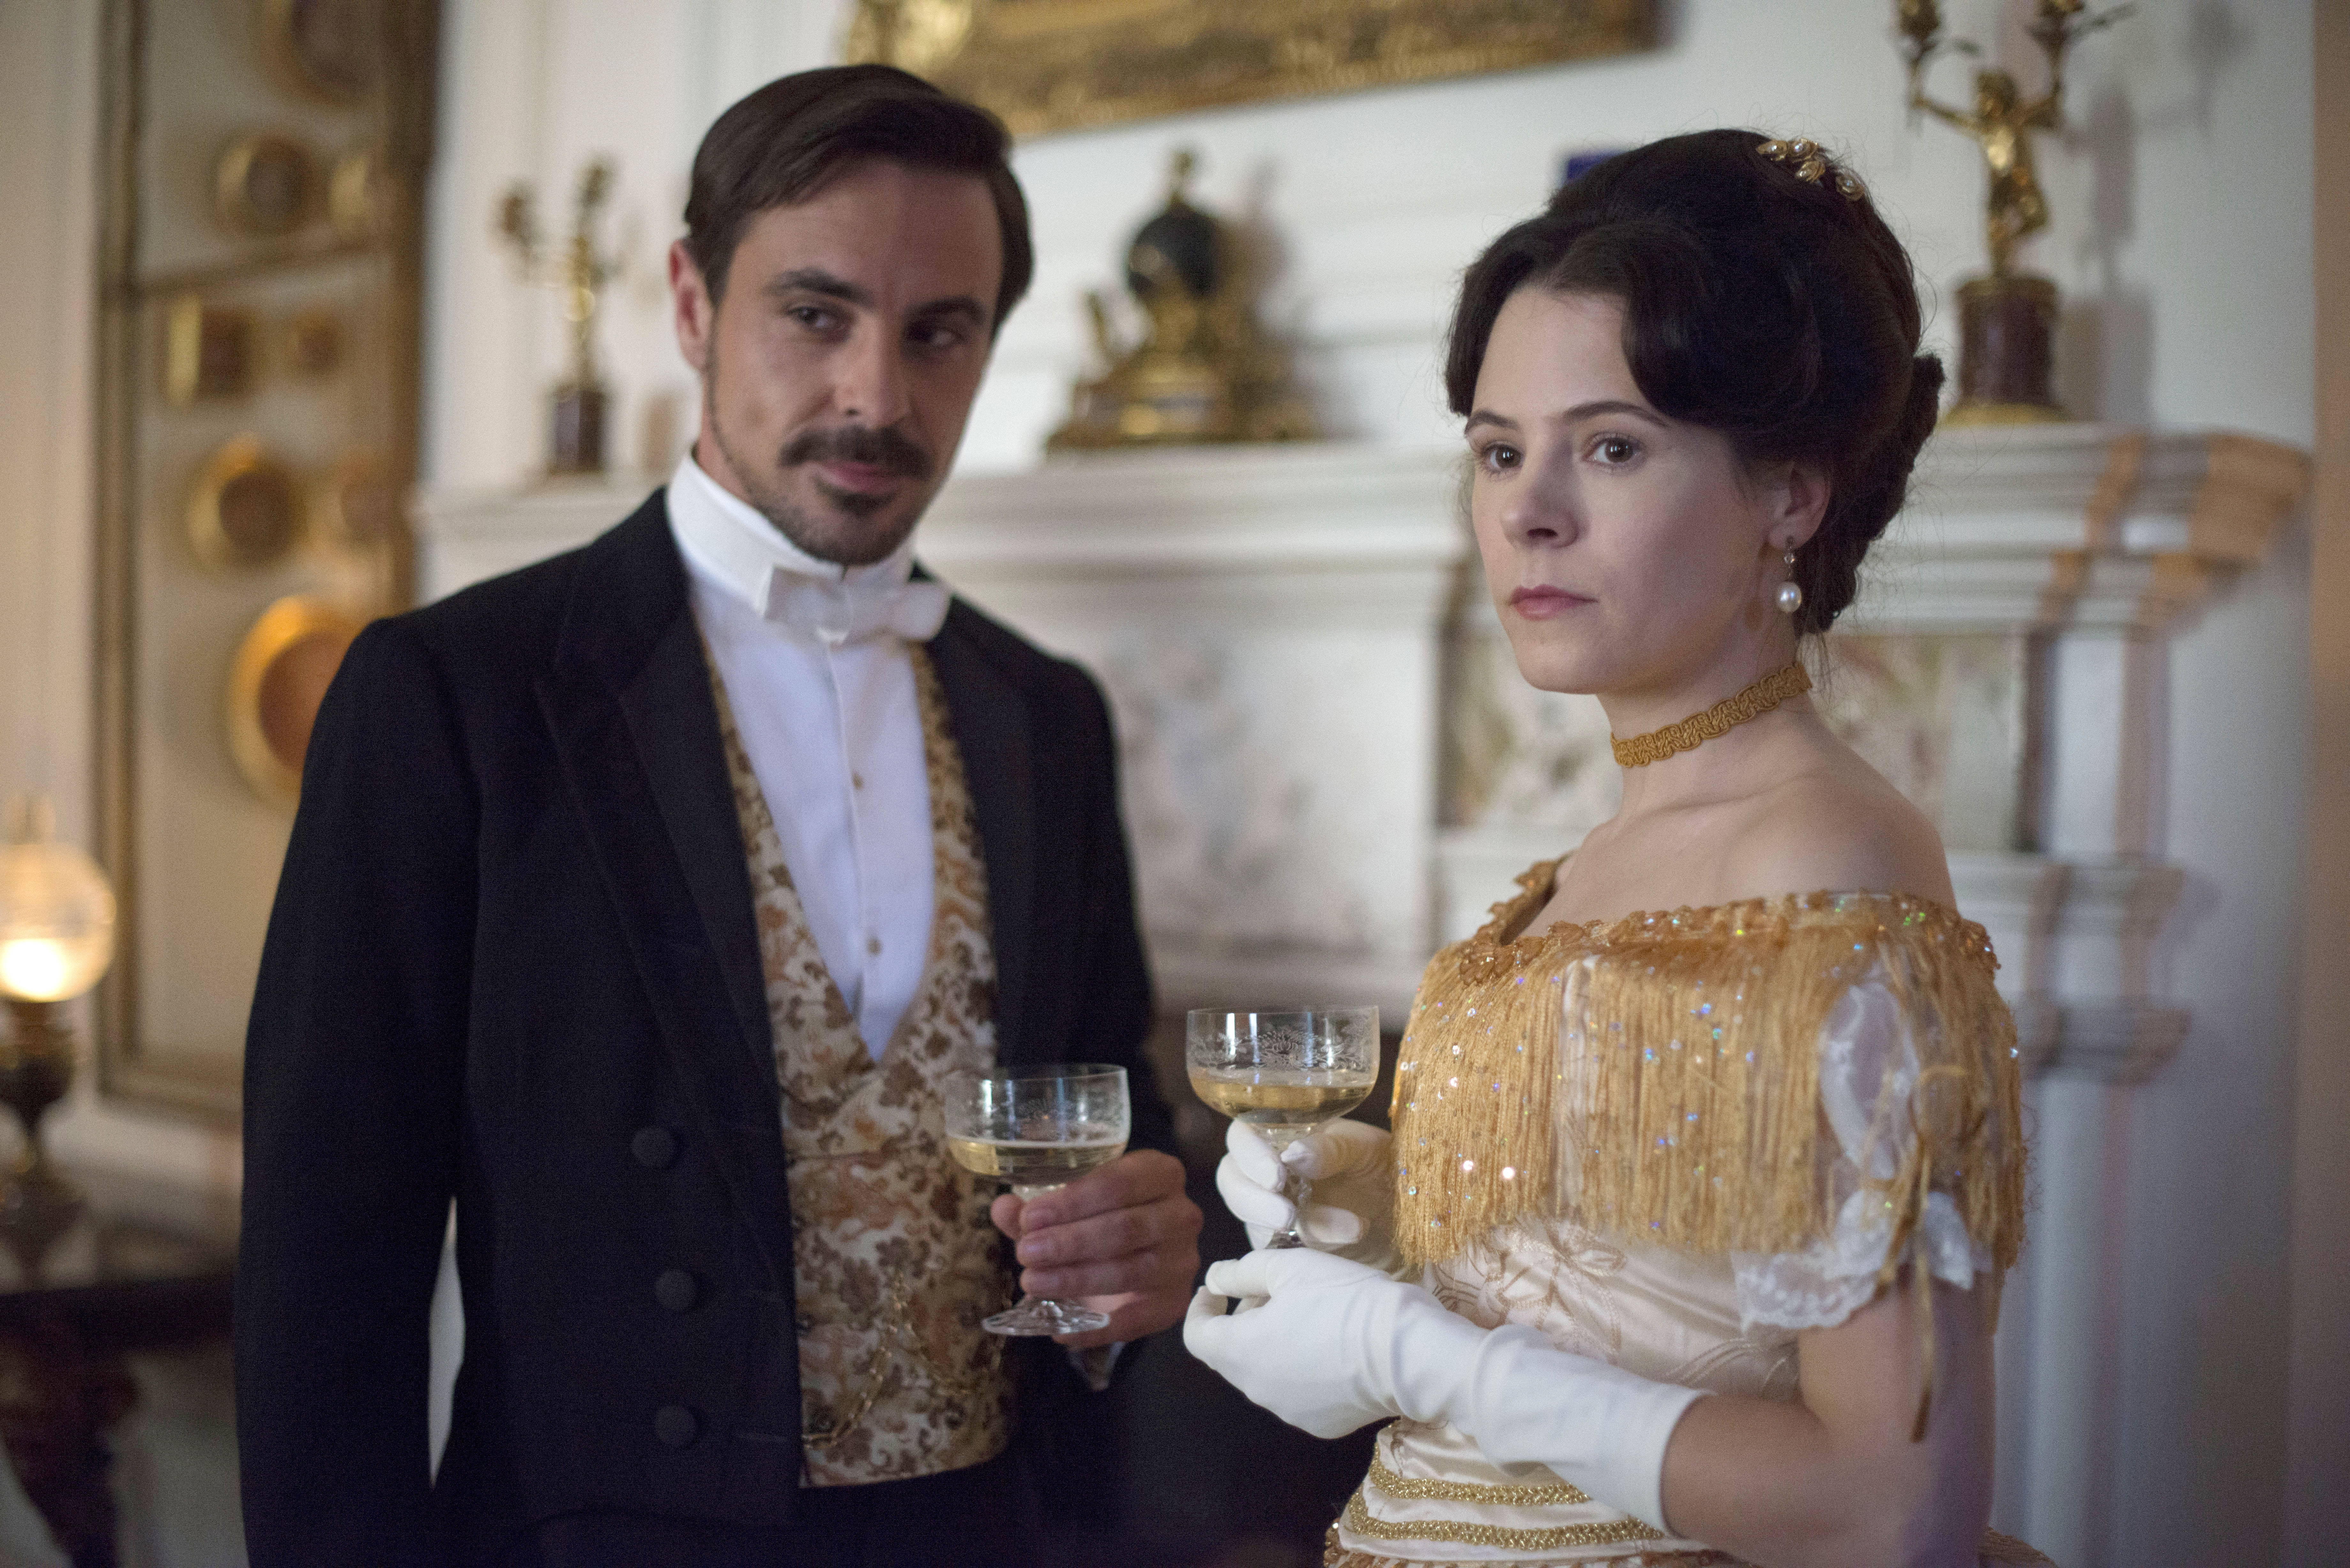 Moray and Katherine in "The Paradise" (Photo: Courtesy of (C) Nick Wall/BBC 2012 for MASTERPIECE)